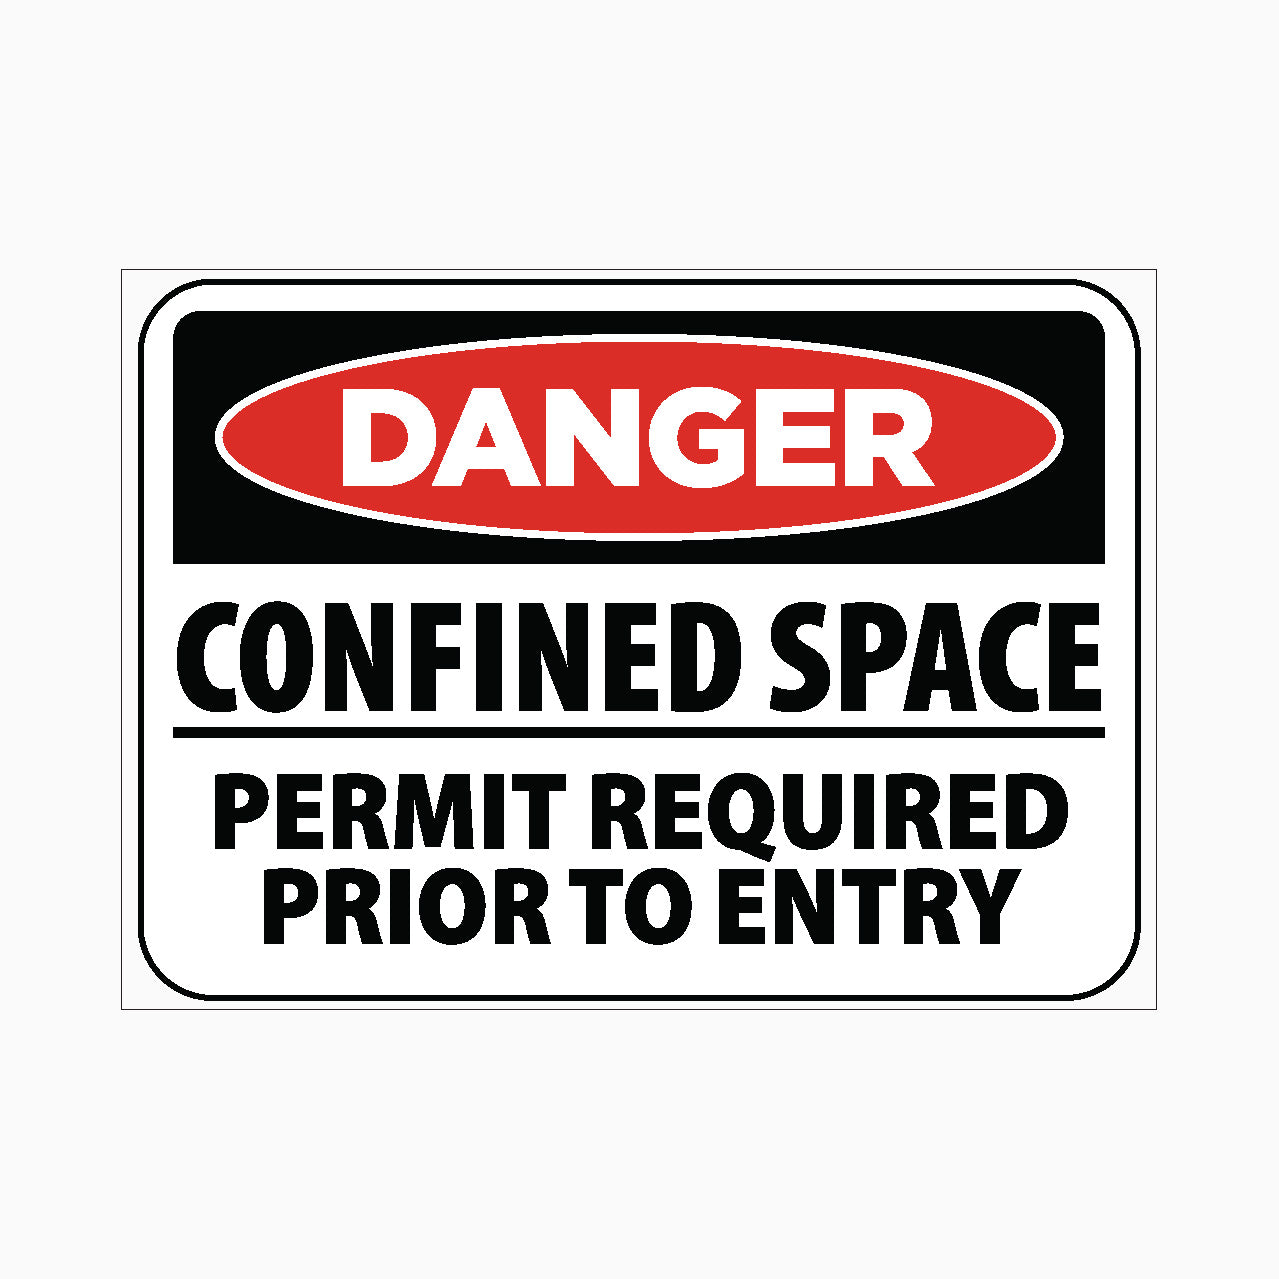 CONFINED SPACE - PERMIT REQUIRED PRIOR TO ENTRY SIGN - GET SIGNS AUSTRALIA